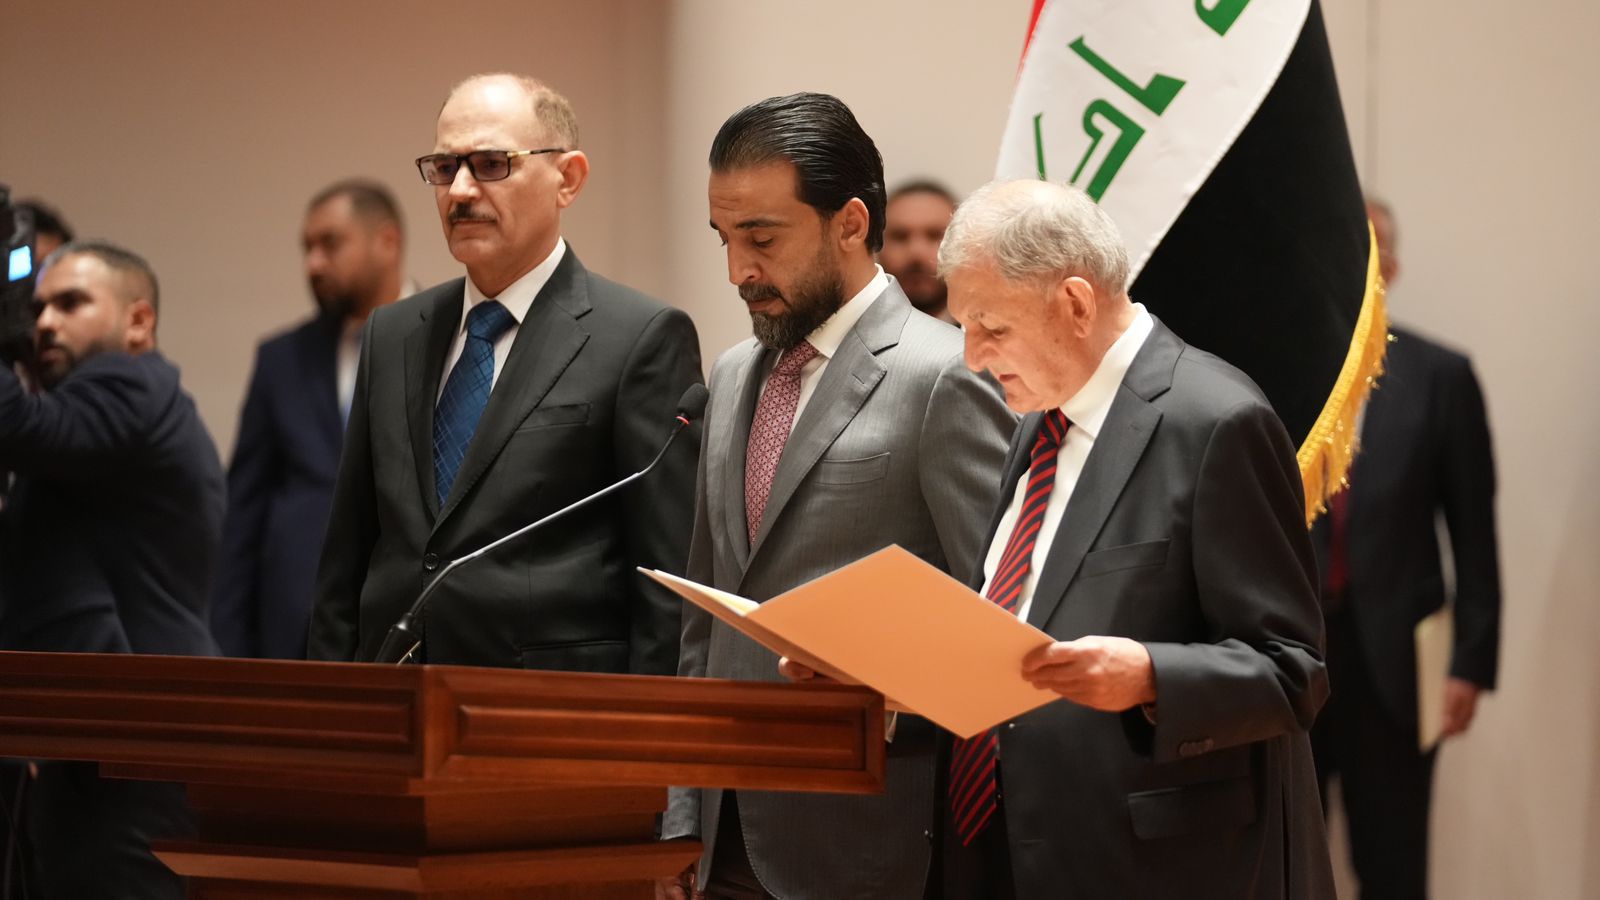 Allawis coalition sets two tasks for the new government